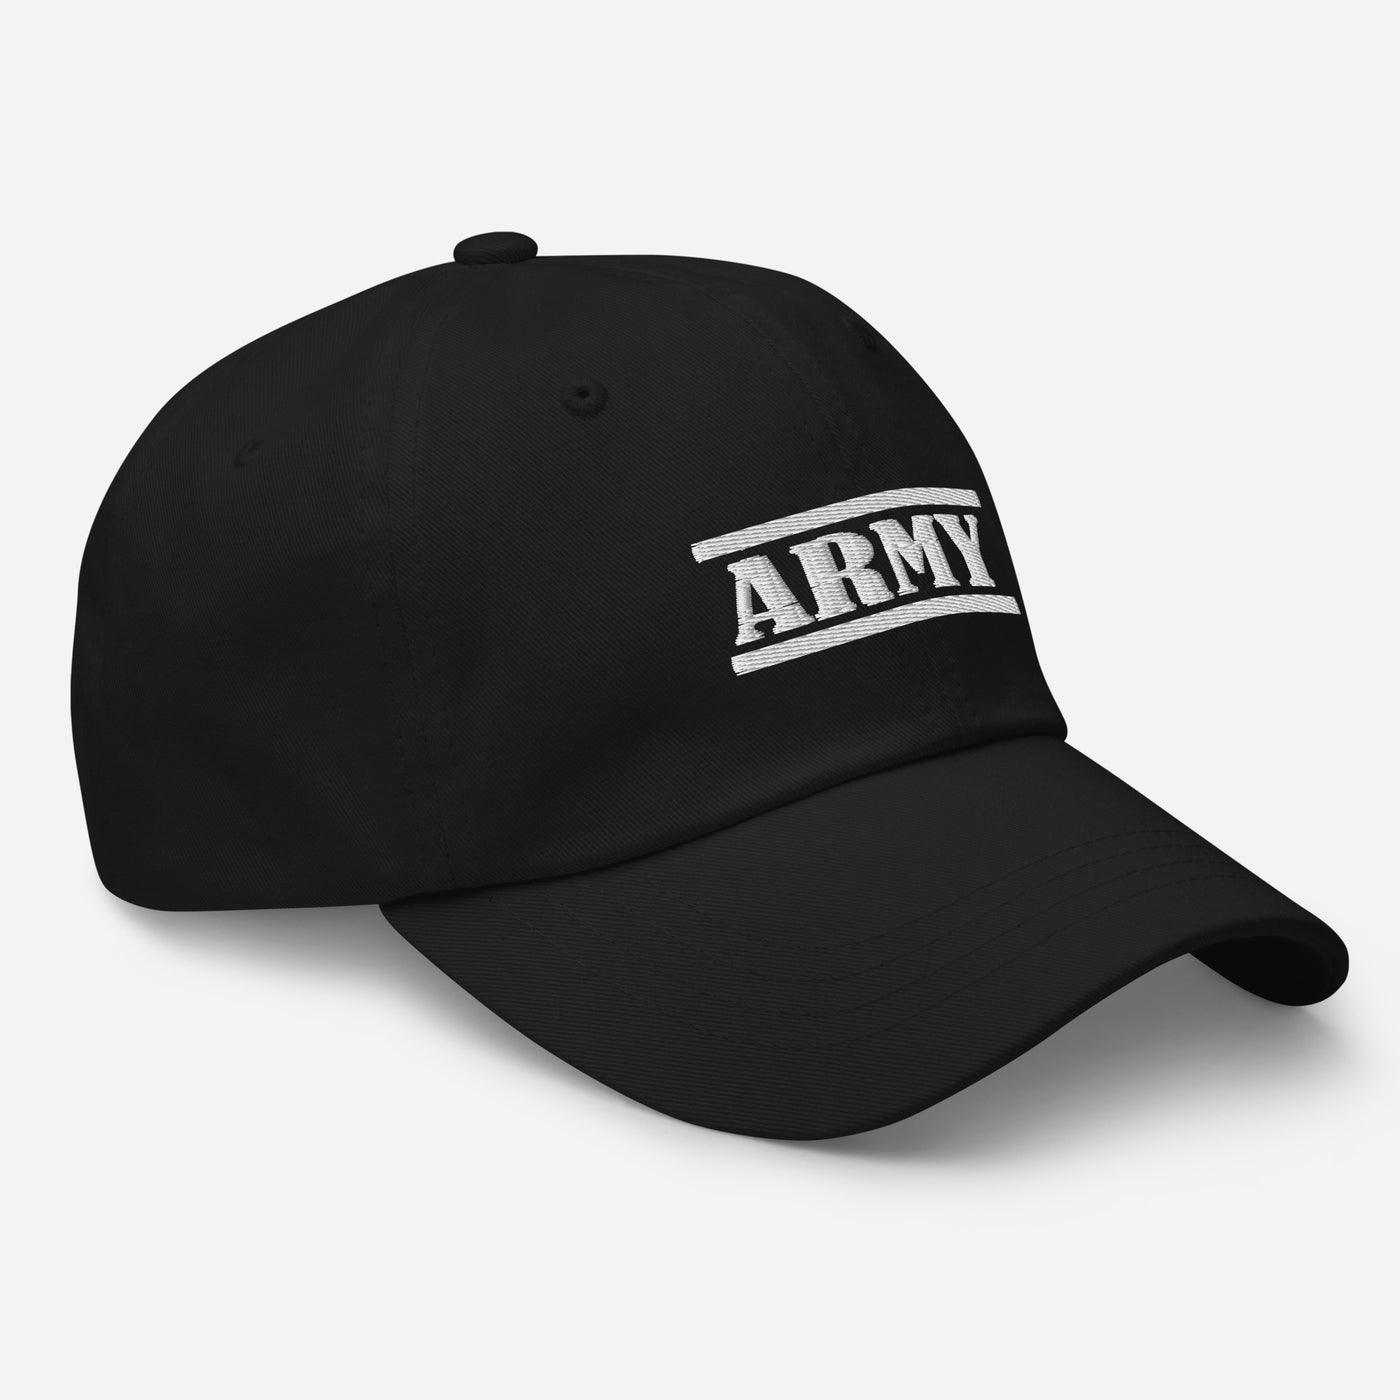 Army Cap Embroidery